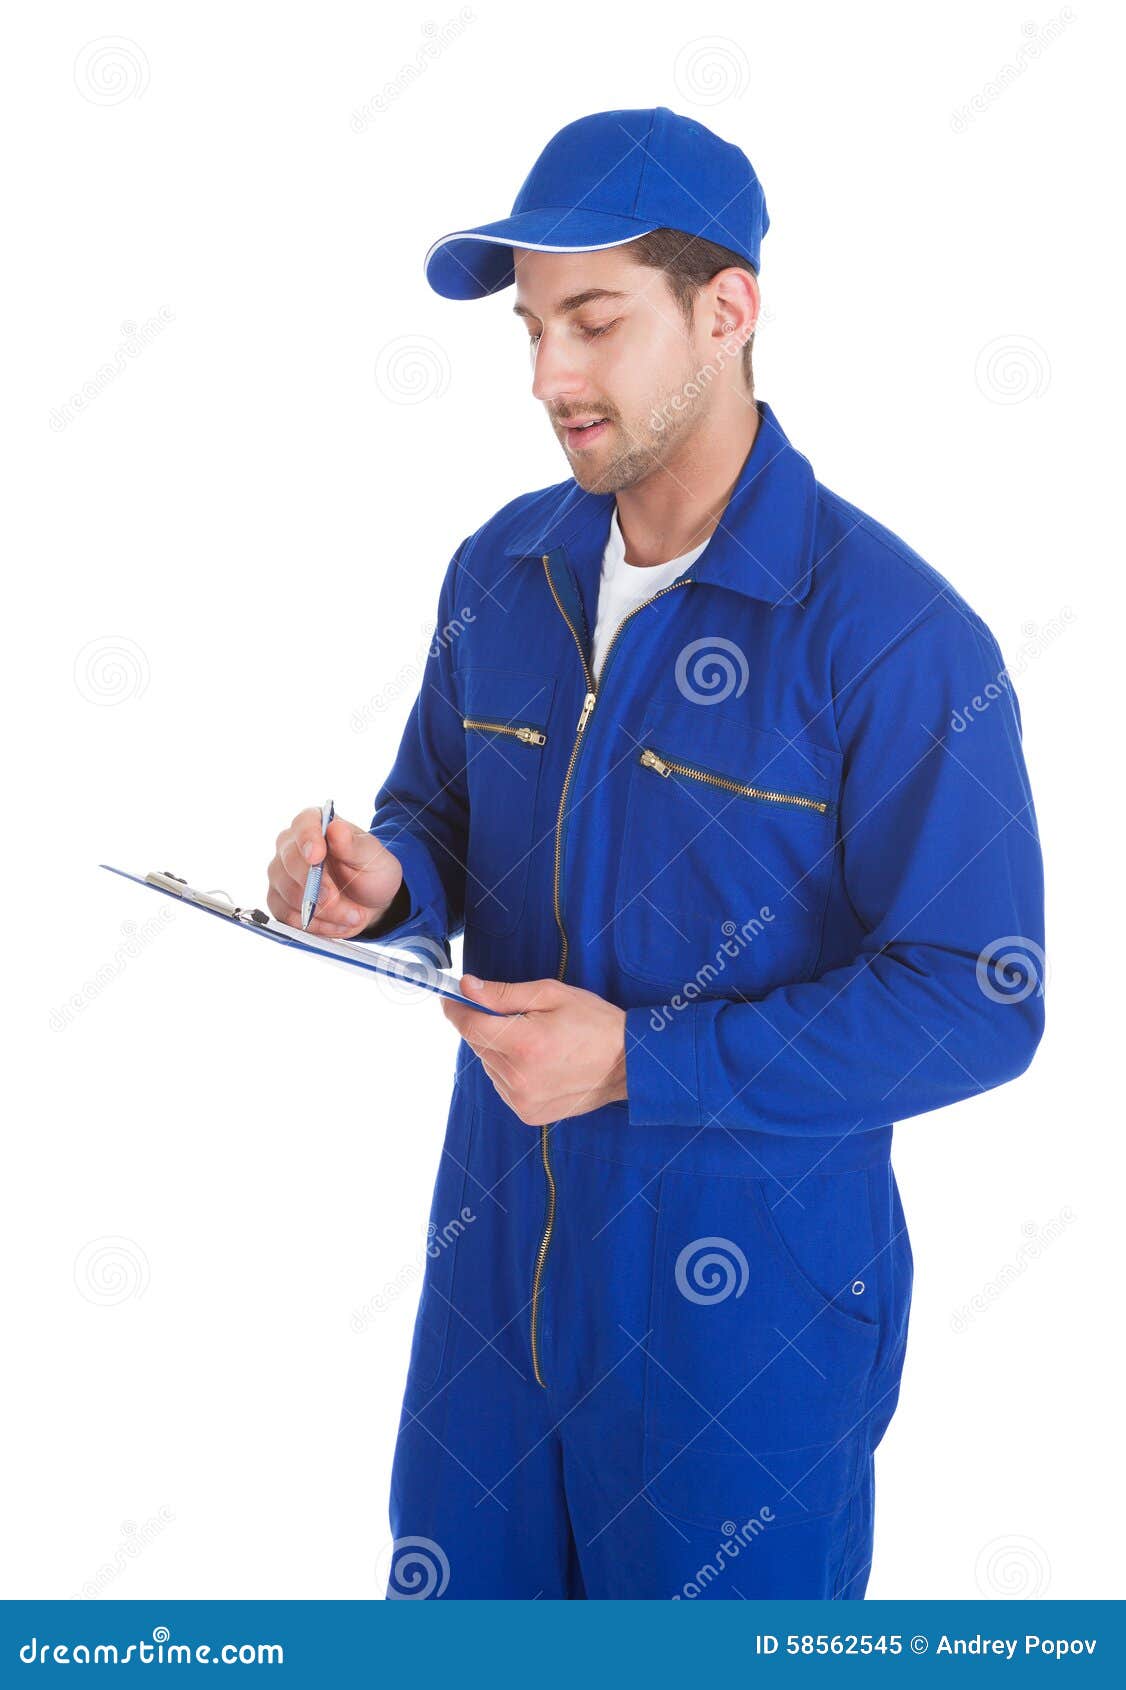 Mechanic In Overall Writing On Clipboard Stock Photo - Image: 58562545